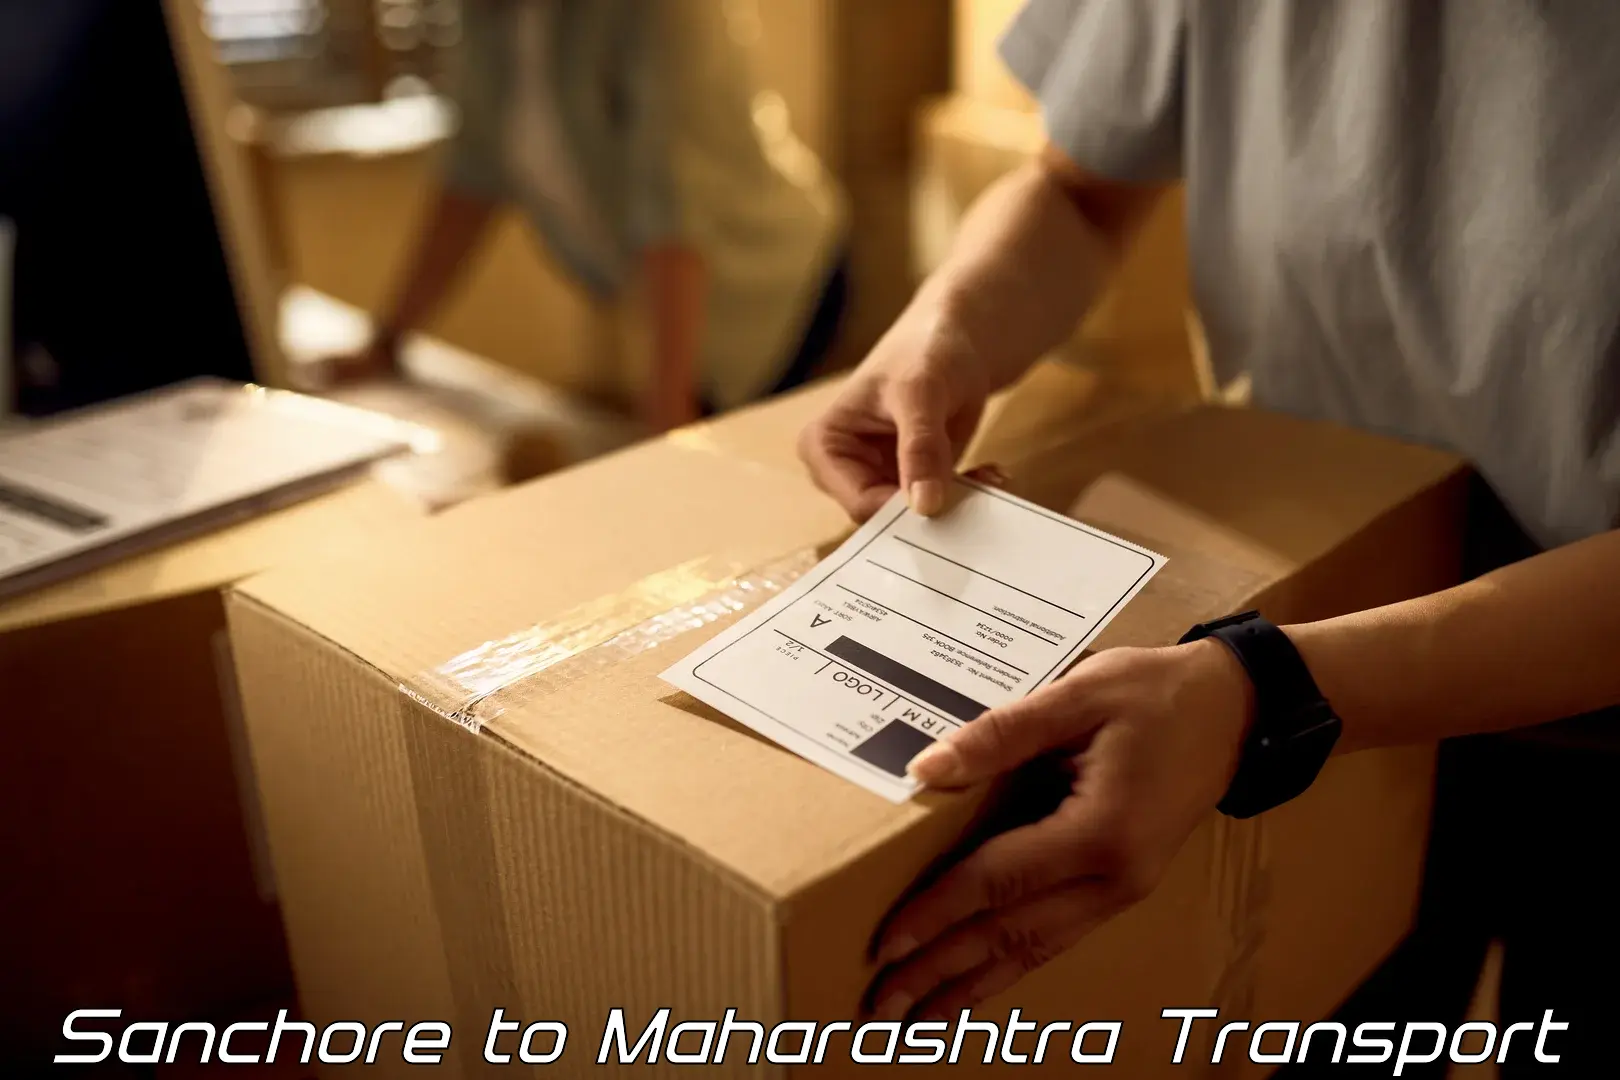 Nationwide transport services Sanchore to Bhiwandi